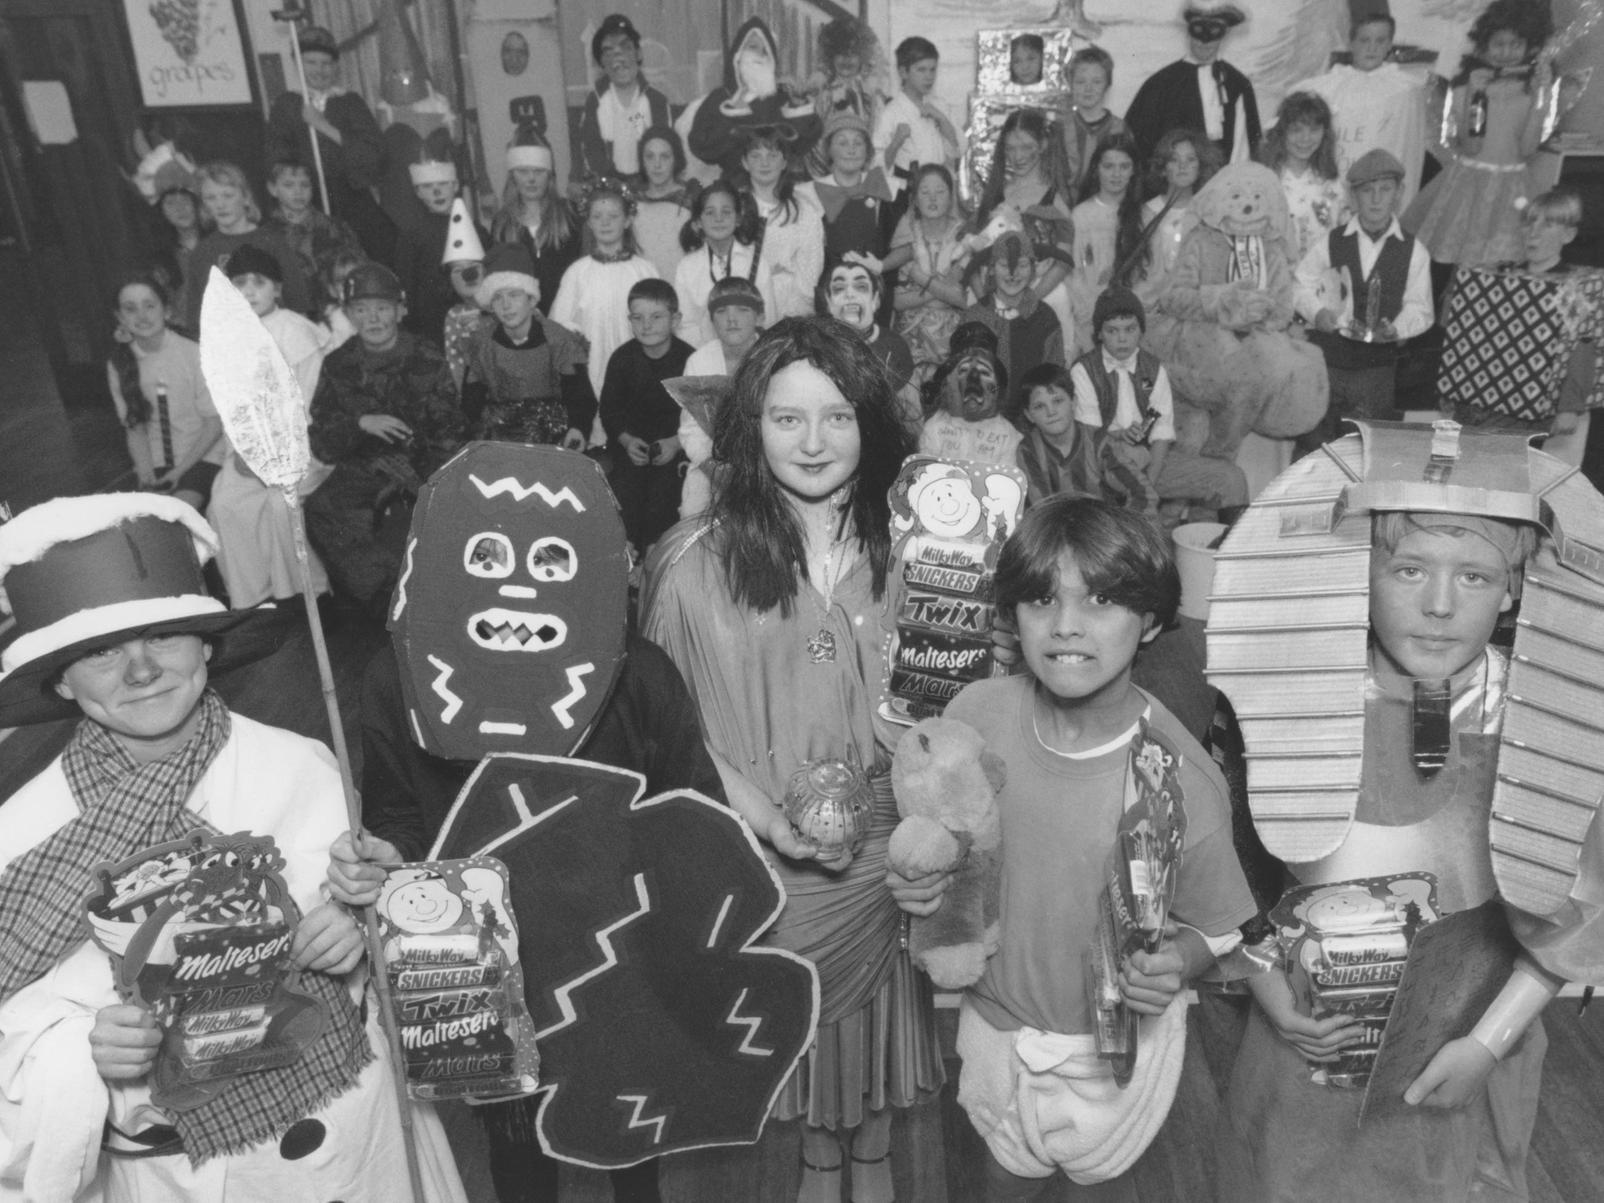 Overdale School held a fancy dress competition in December 1995. The winners are pictured, left to right, Sean Dodsworth as The Snowman, Lee Stone as a tribal warrior, Emma Deighton as Mystic Meg, Shane Davies as a baby, and Daniel Wright as Tutankhamun.